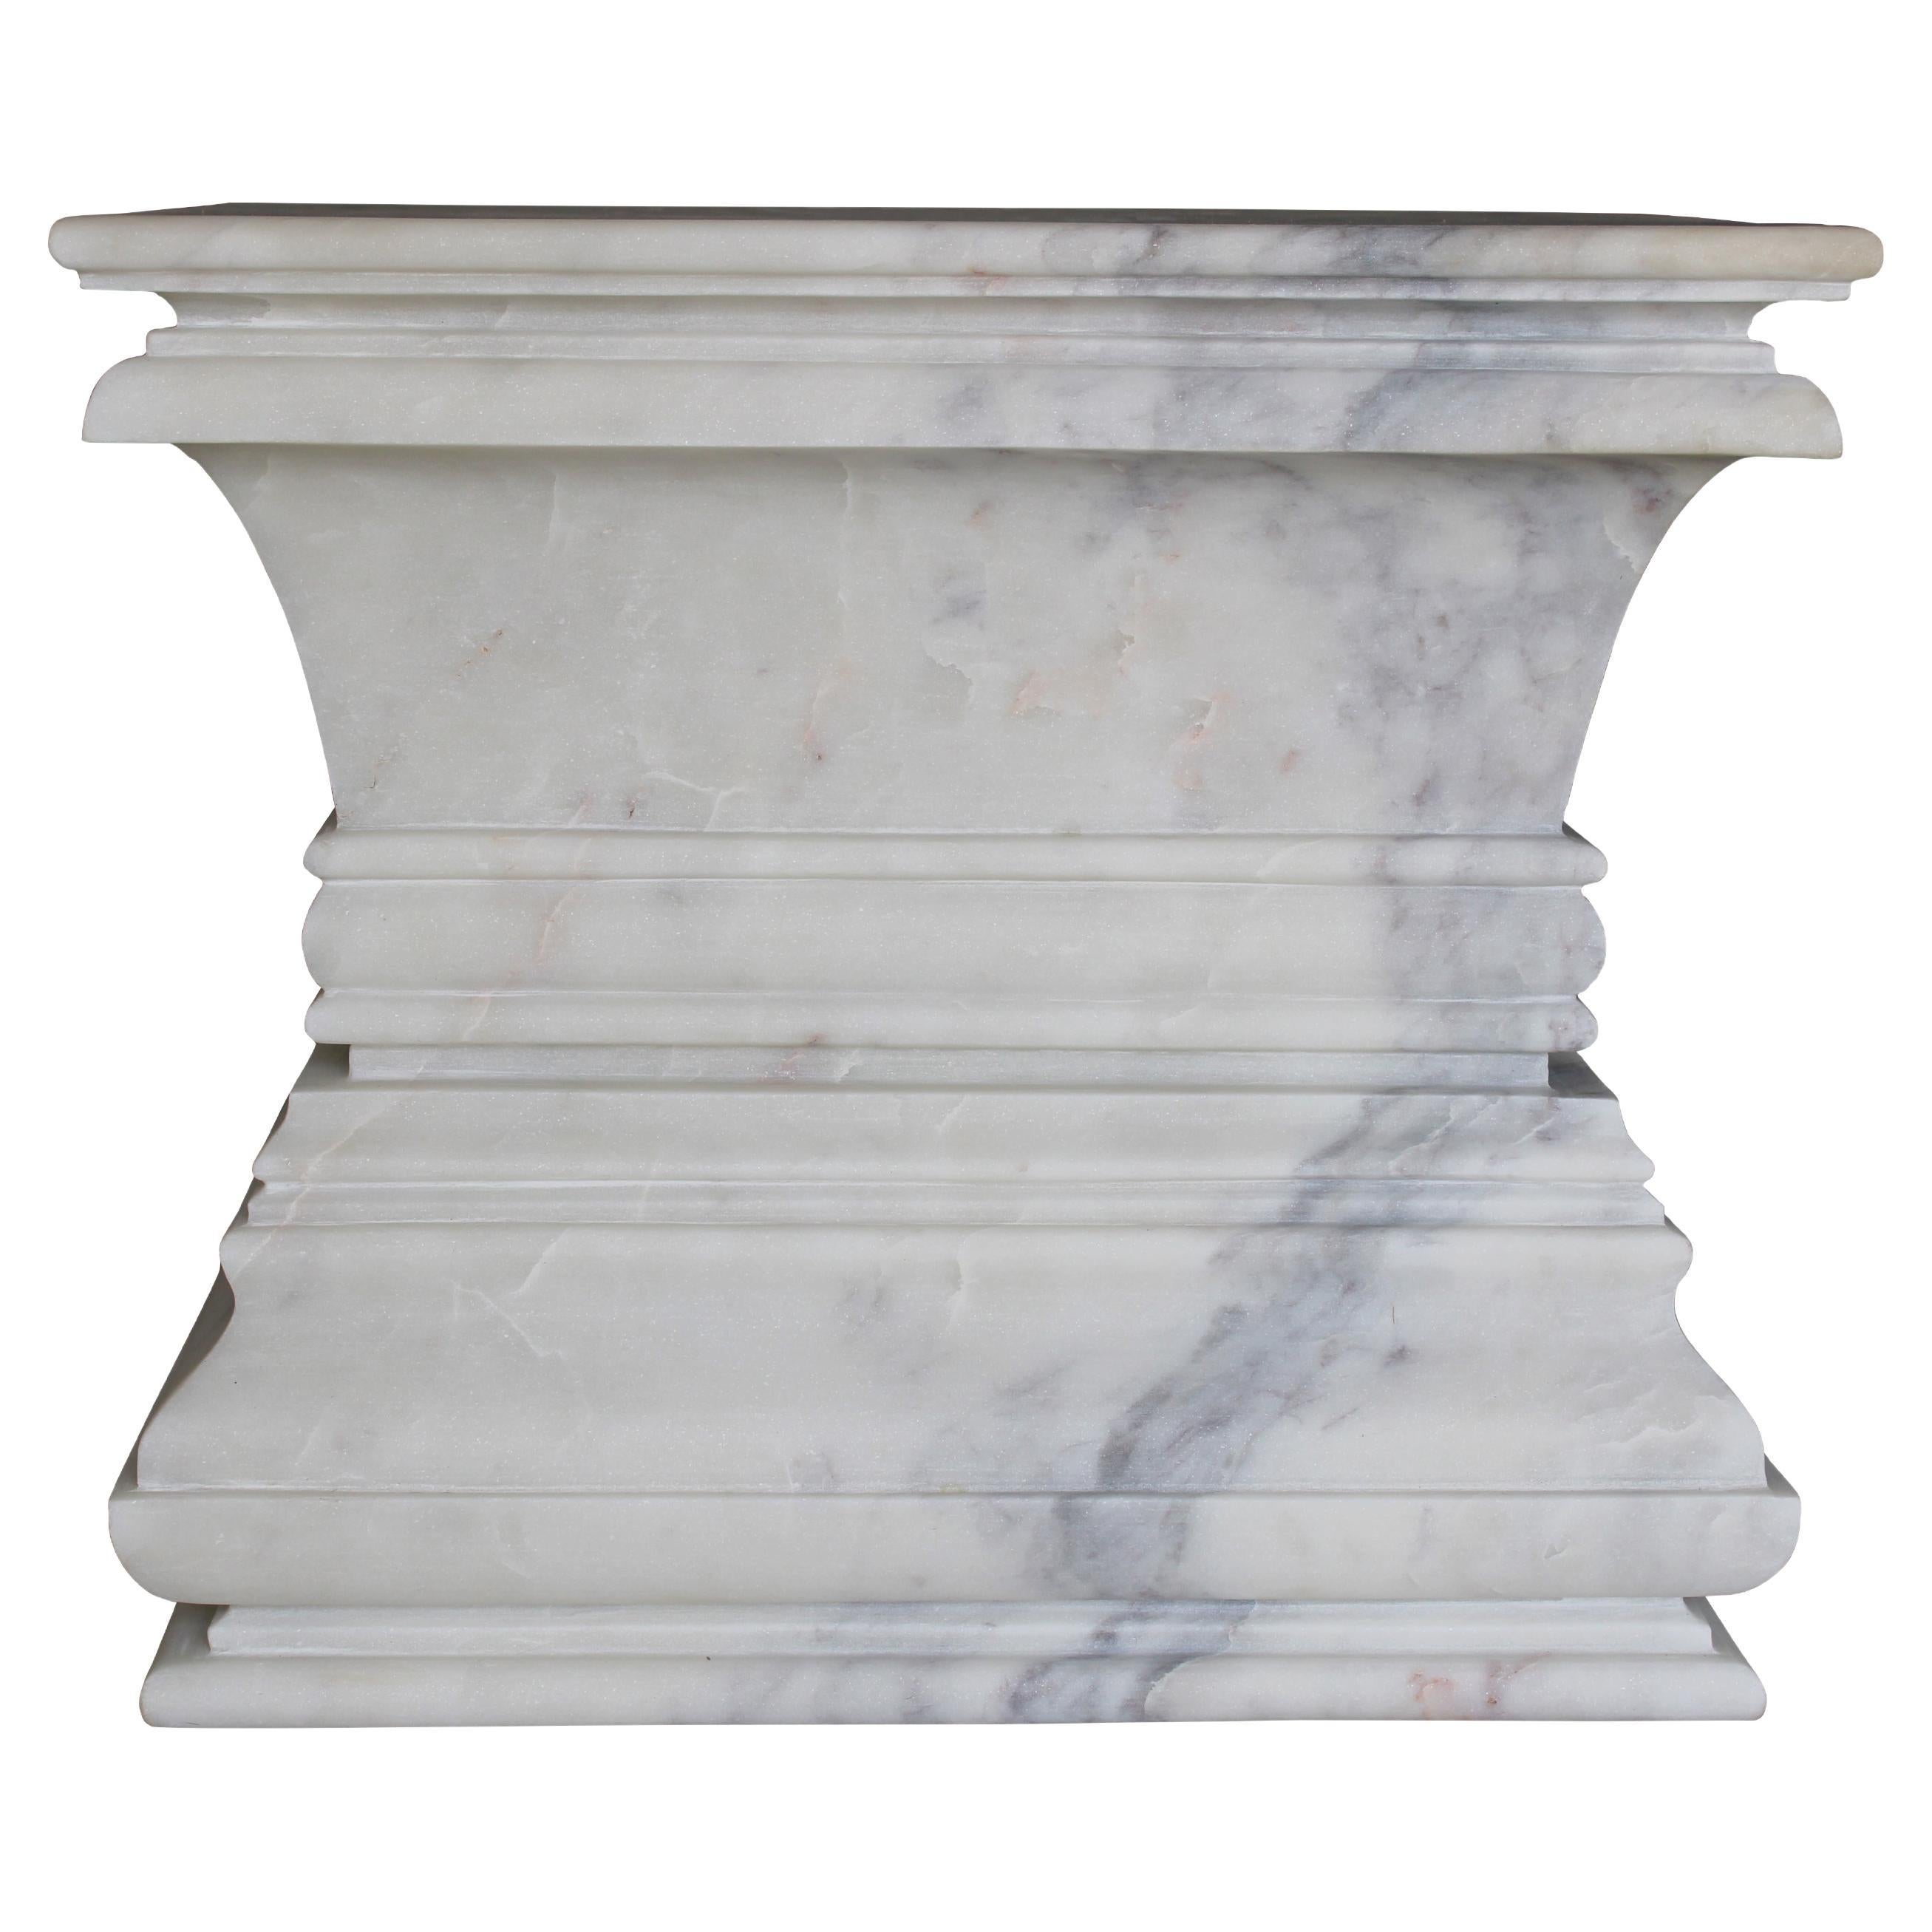 Square Architectural Pedestal Side Table in White Marble by Stephanie Odegard